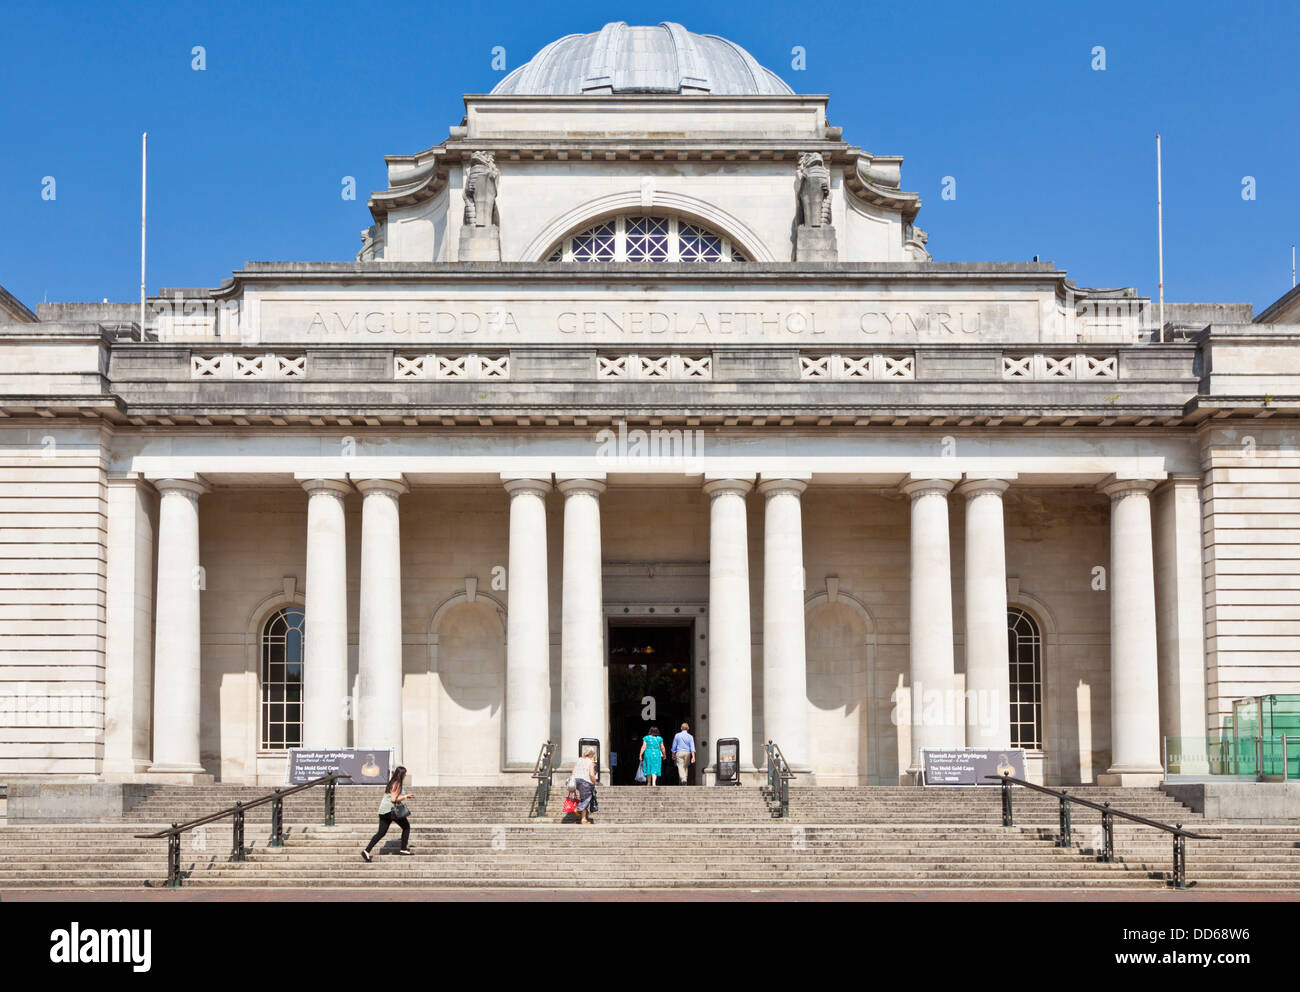 National Museum of Wales, Cardiff Cardiff Cathays Park South Glamorgan South Wales GB UK EU Europe Banque D'Images